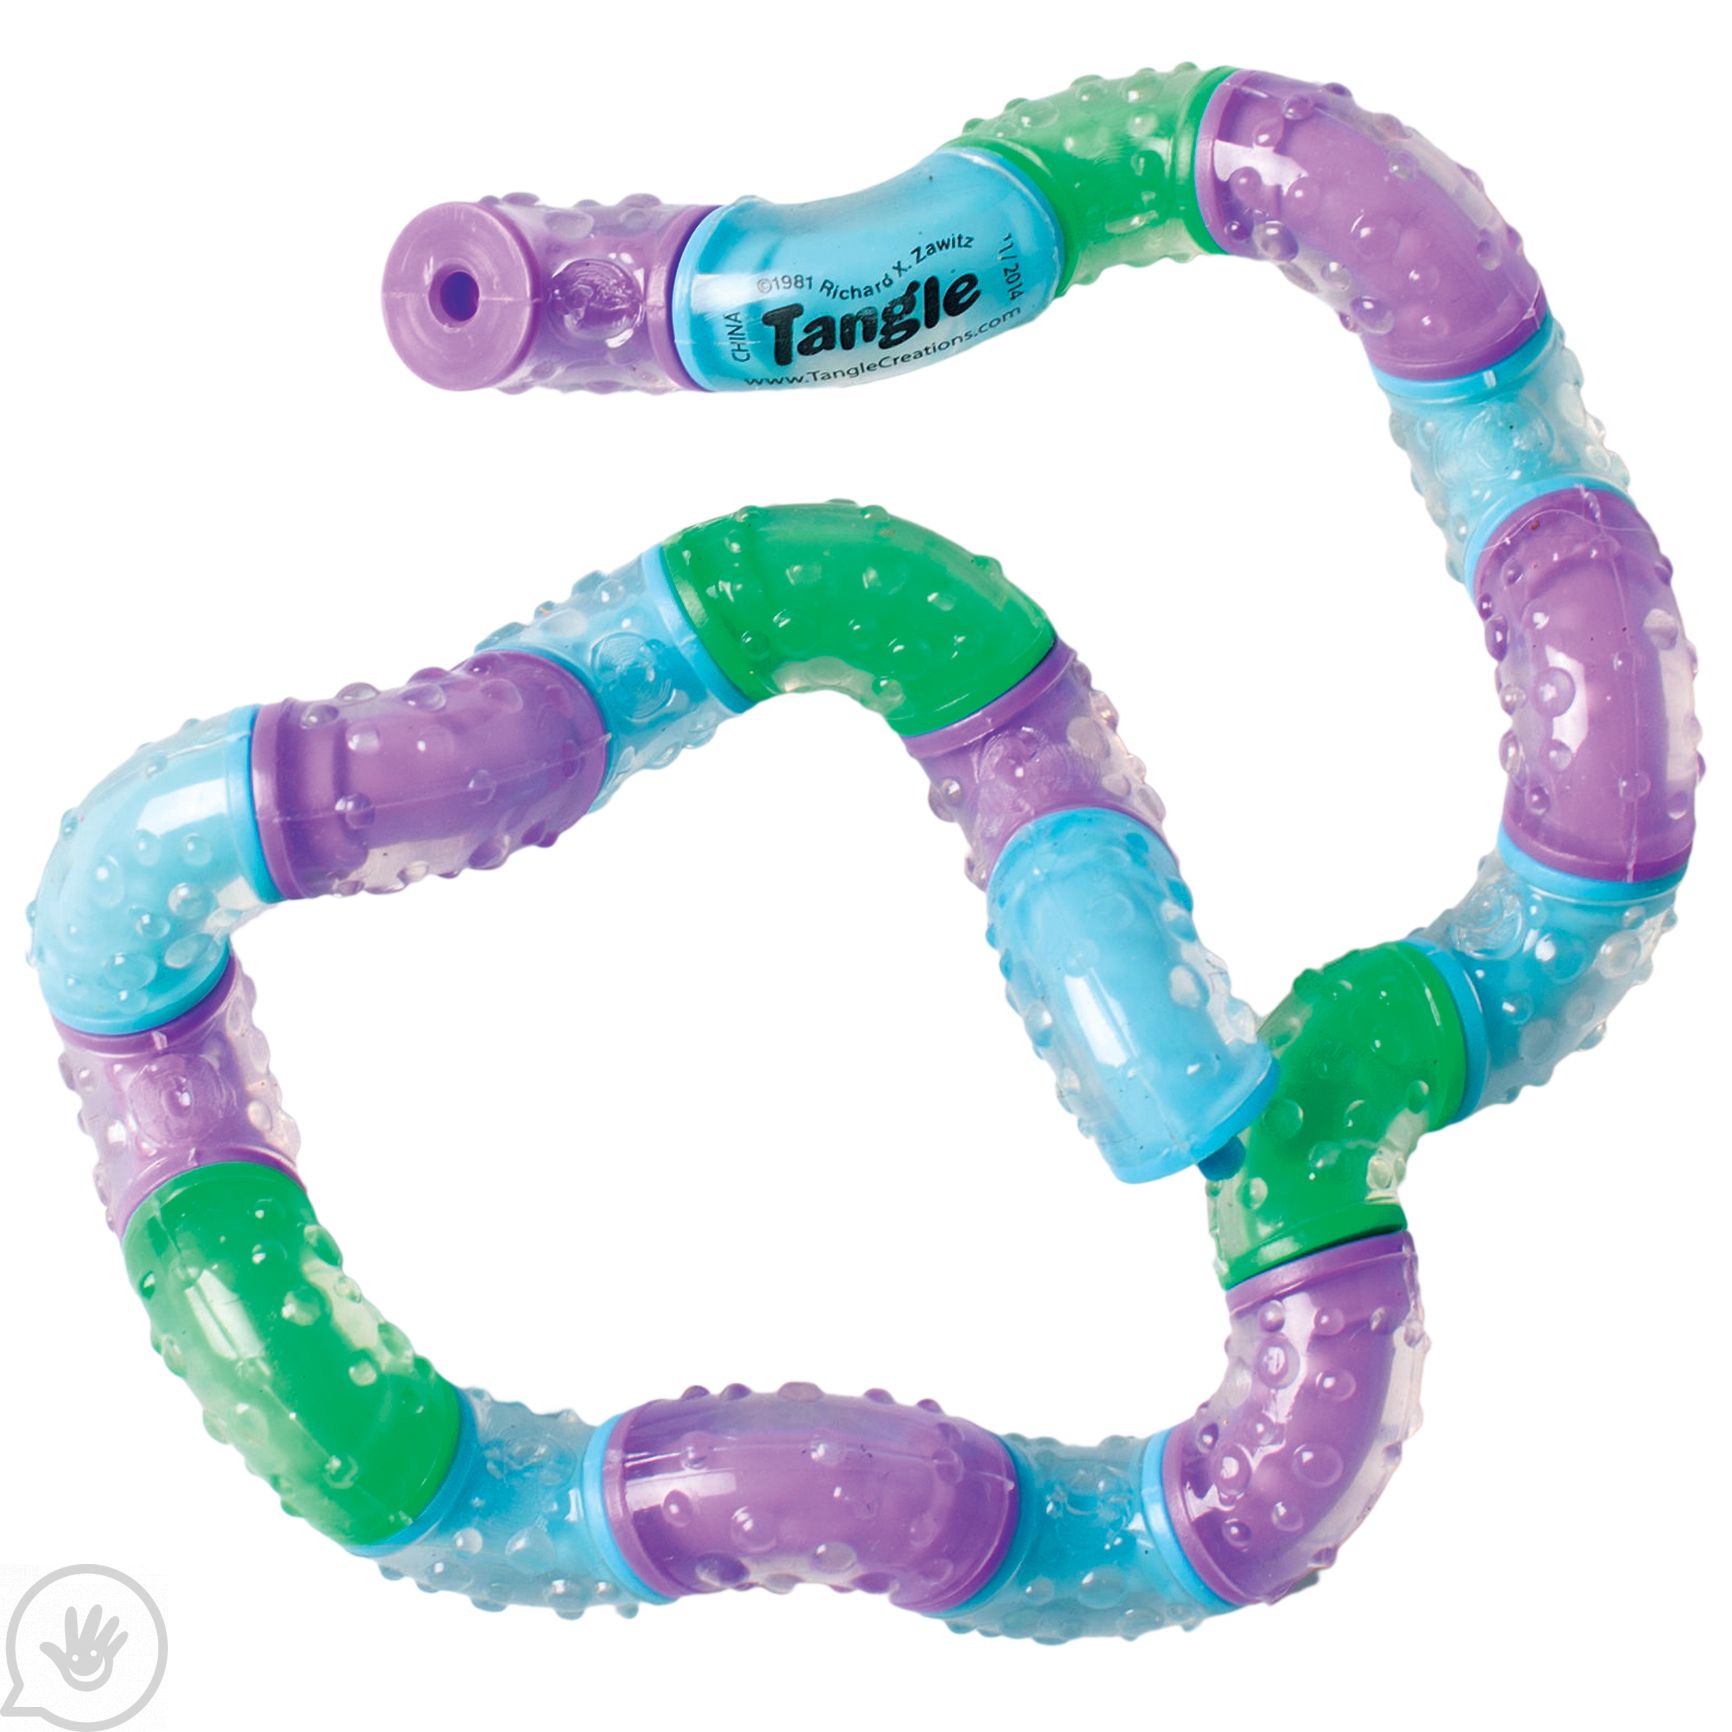 Therapy Tangle, Hand Therapy Exercise Toy